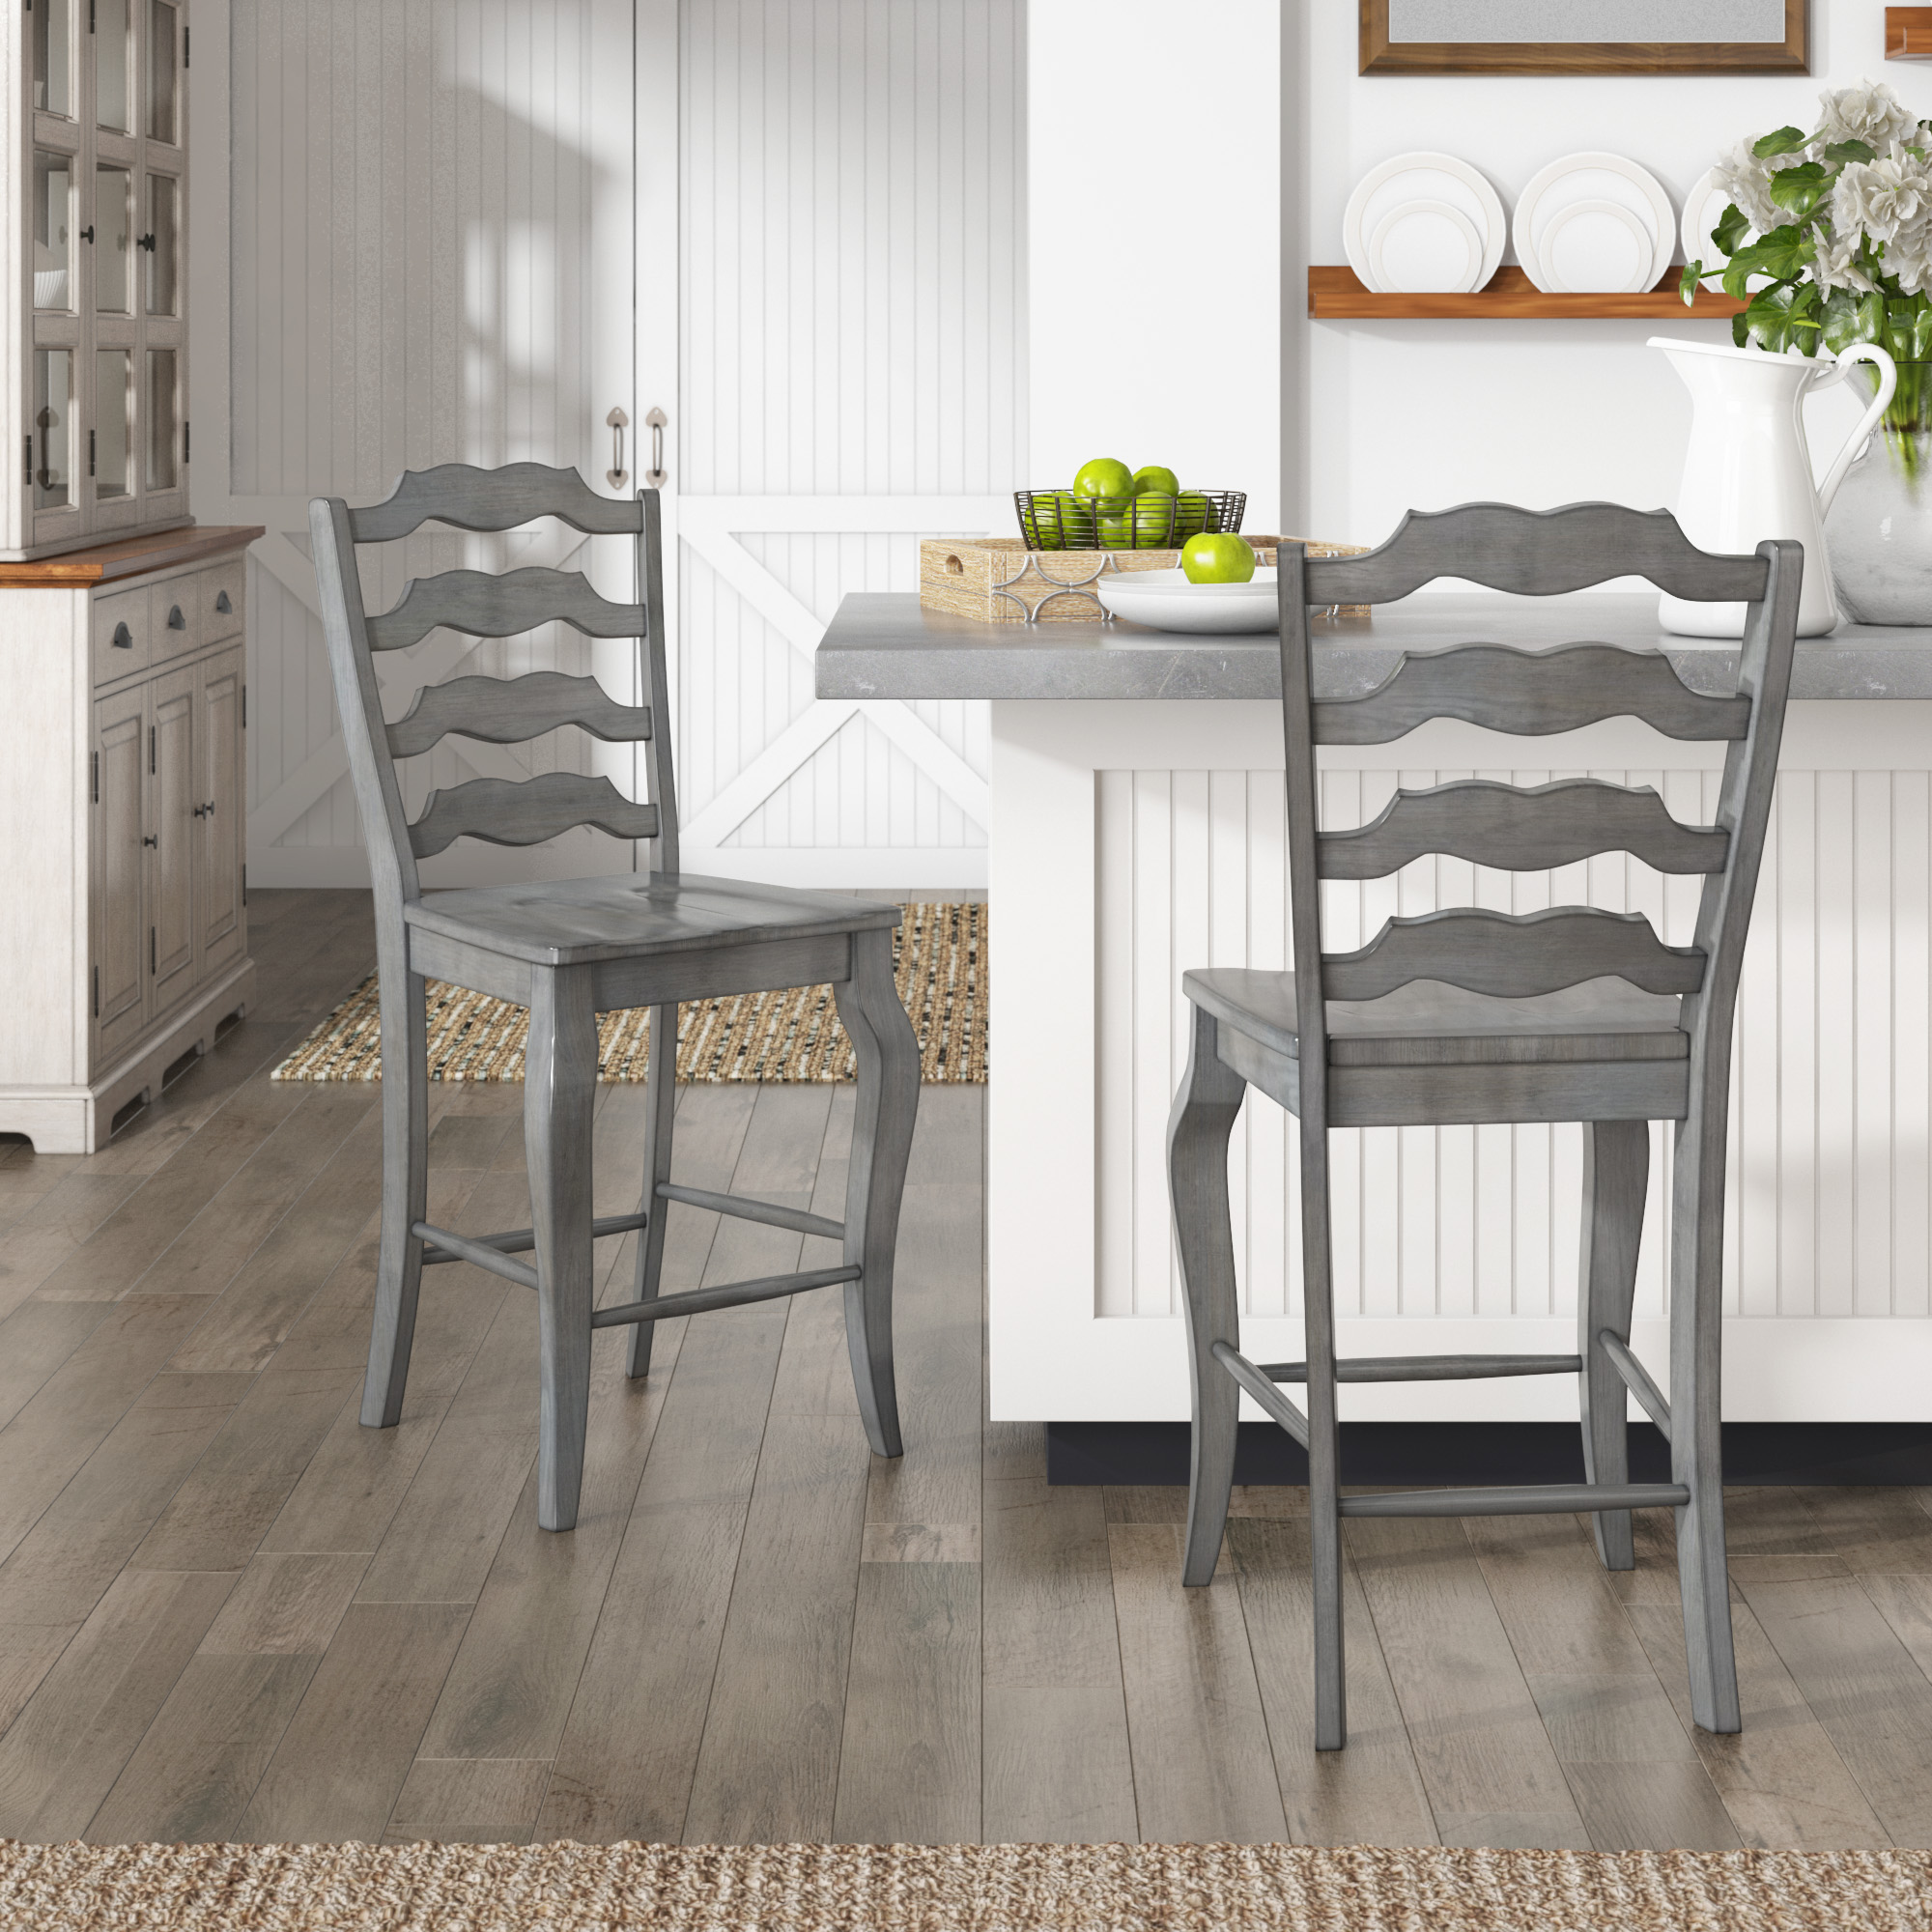 French Ladder Back Wood Counter Height Chairs (Set of 2)